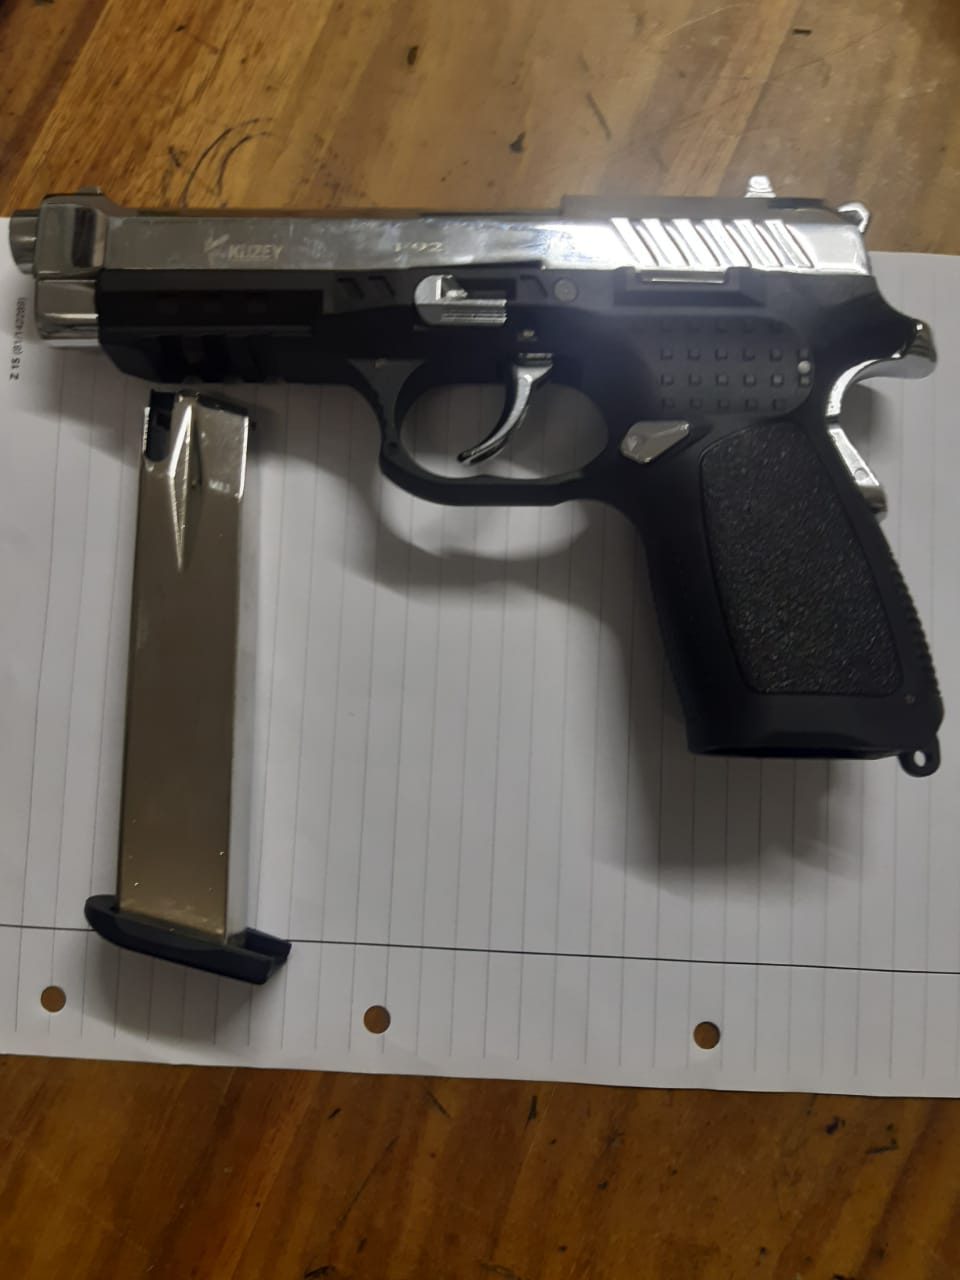 Driver arrested for possession of an unlicensed firearm and ammunition